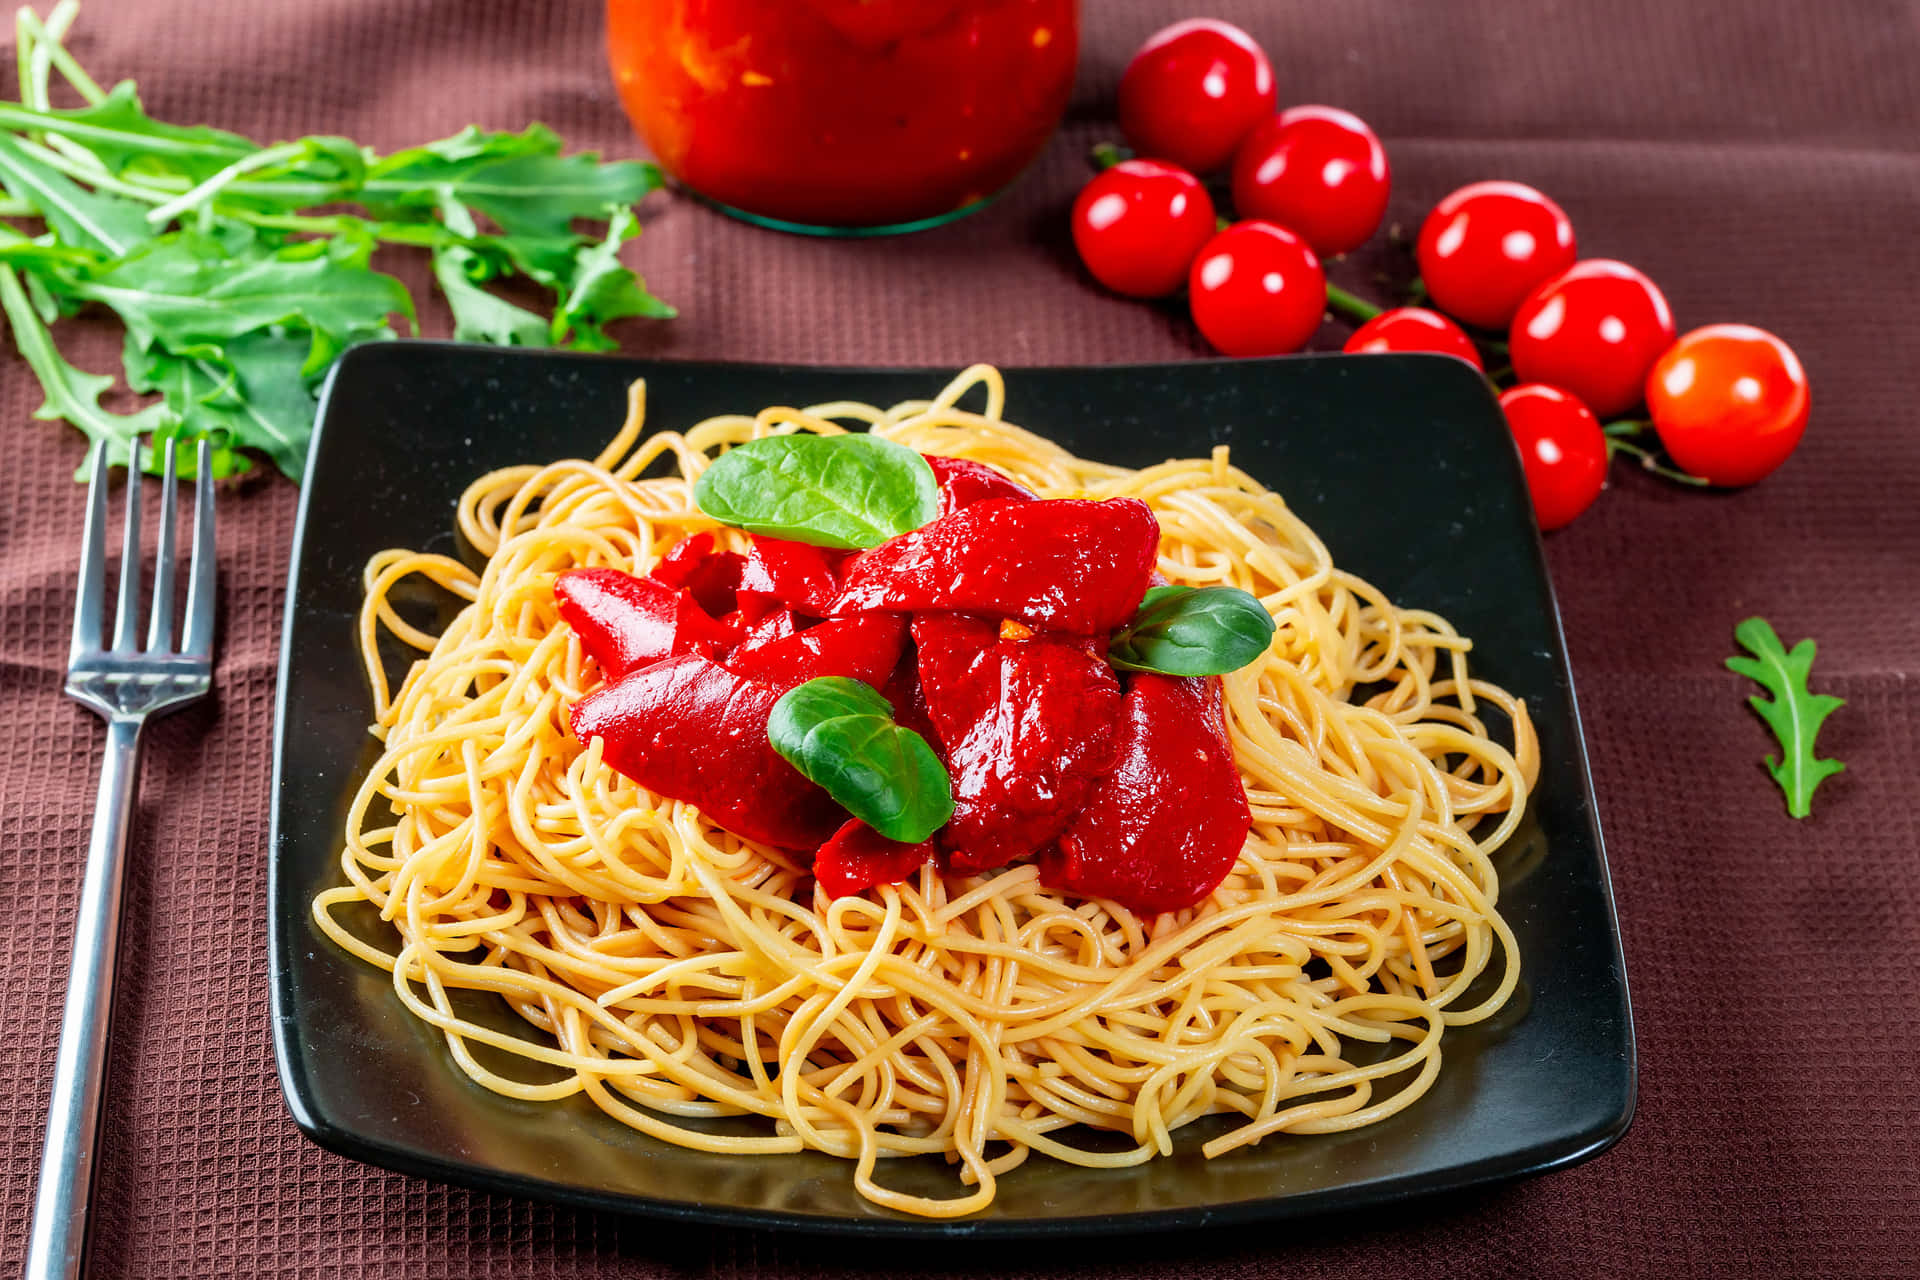 A Plate Of Spaghetti With Tomatoes And Parsley